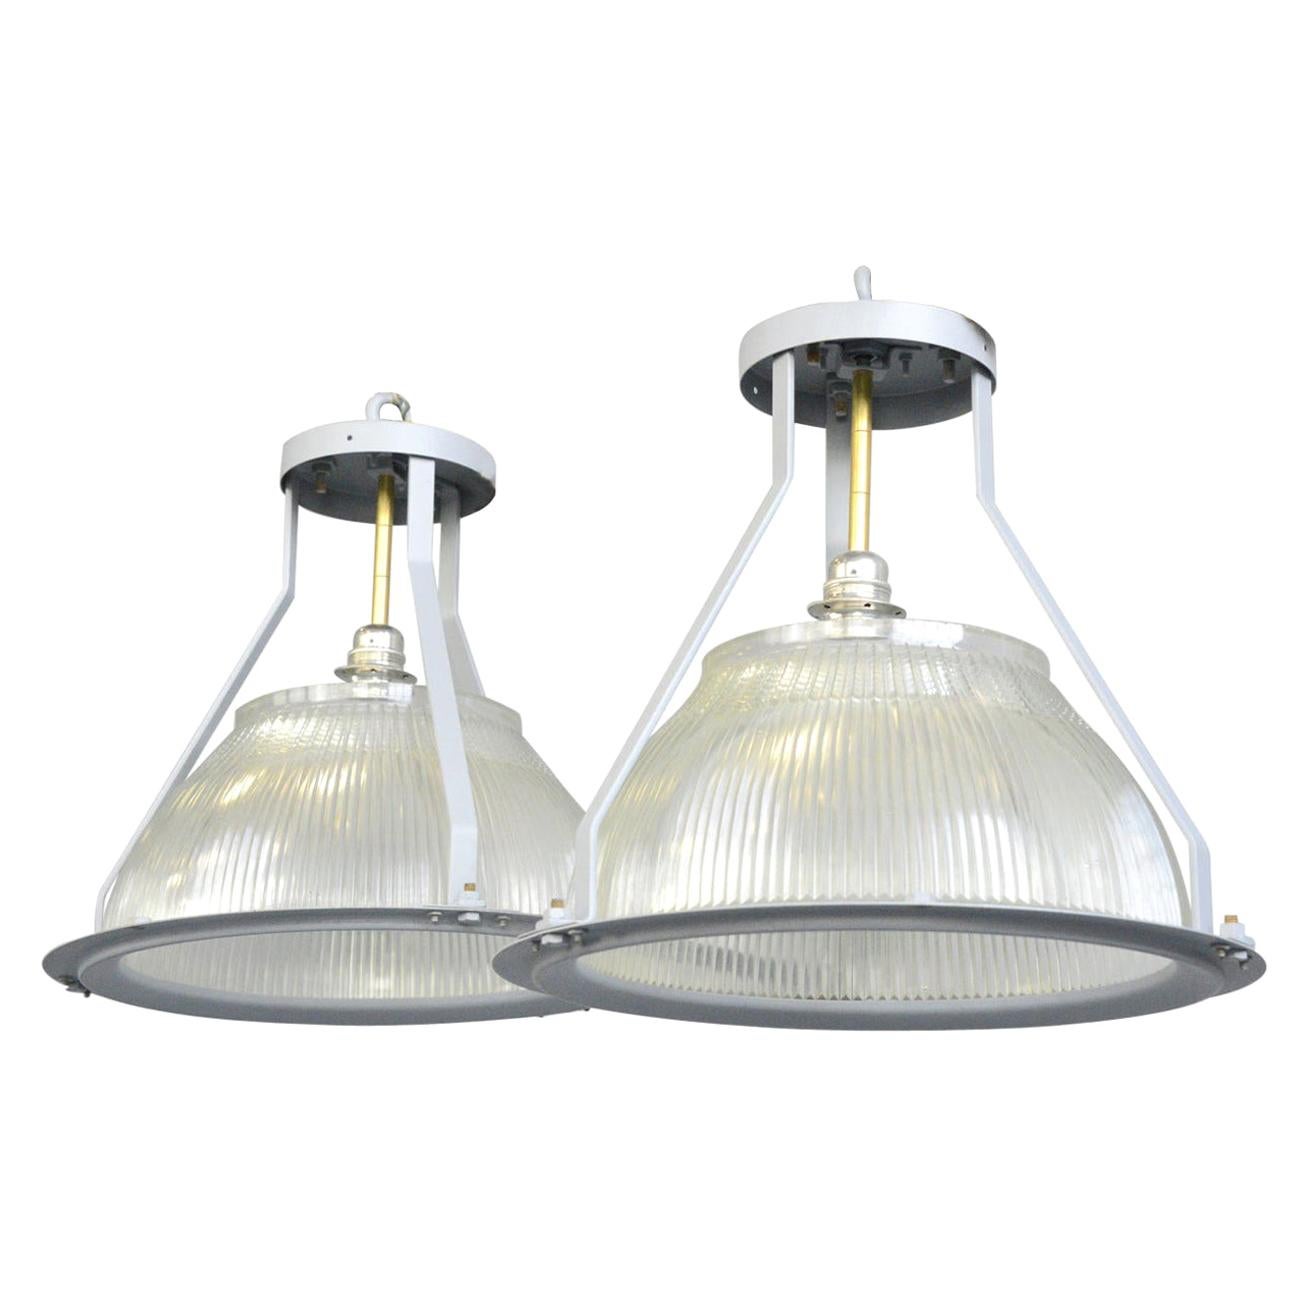 Large aircraft hanger lights by Holophane, circa 1940s

- Price is per light
- Heavy prismatic glass diffusers
- Comes with 100cm of gold twist cable
- Comes with 100cm of steel suspension chain and ceiling hooks
- Takes E27 fitting bulbs
-